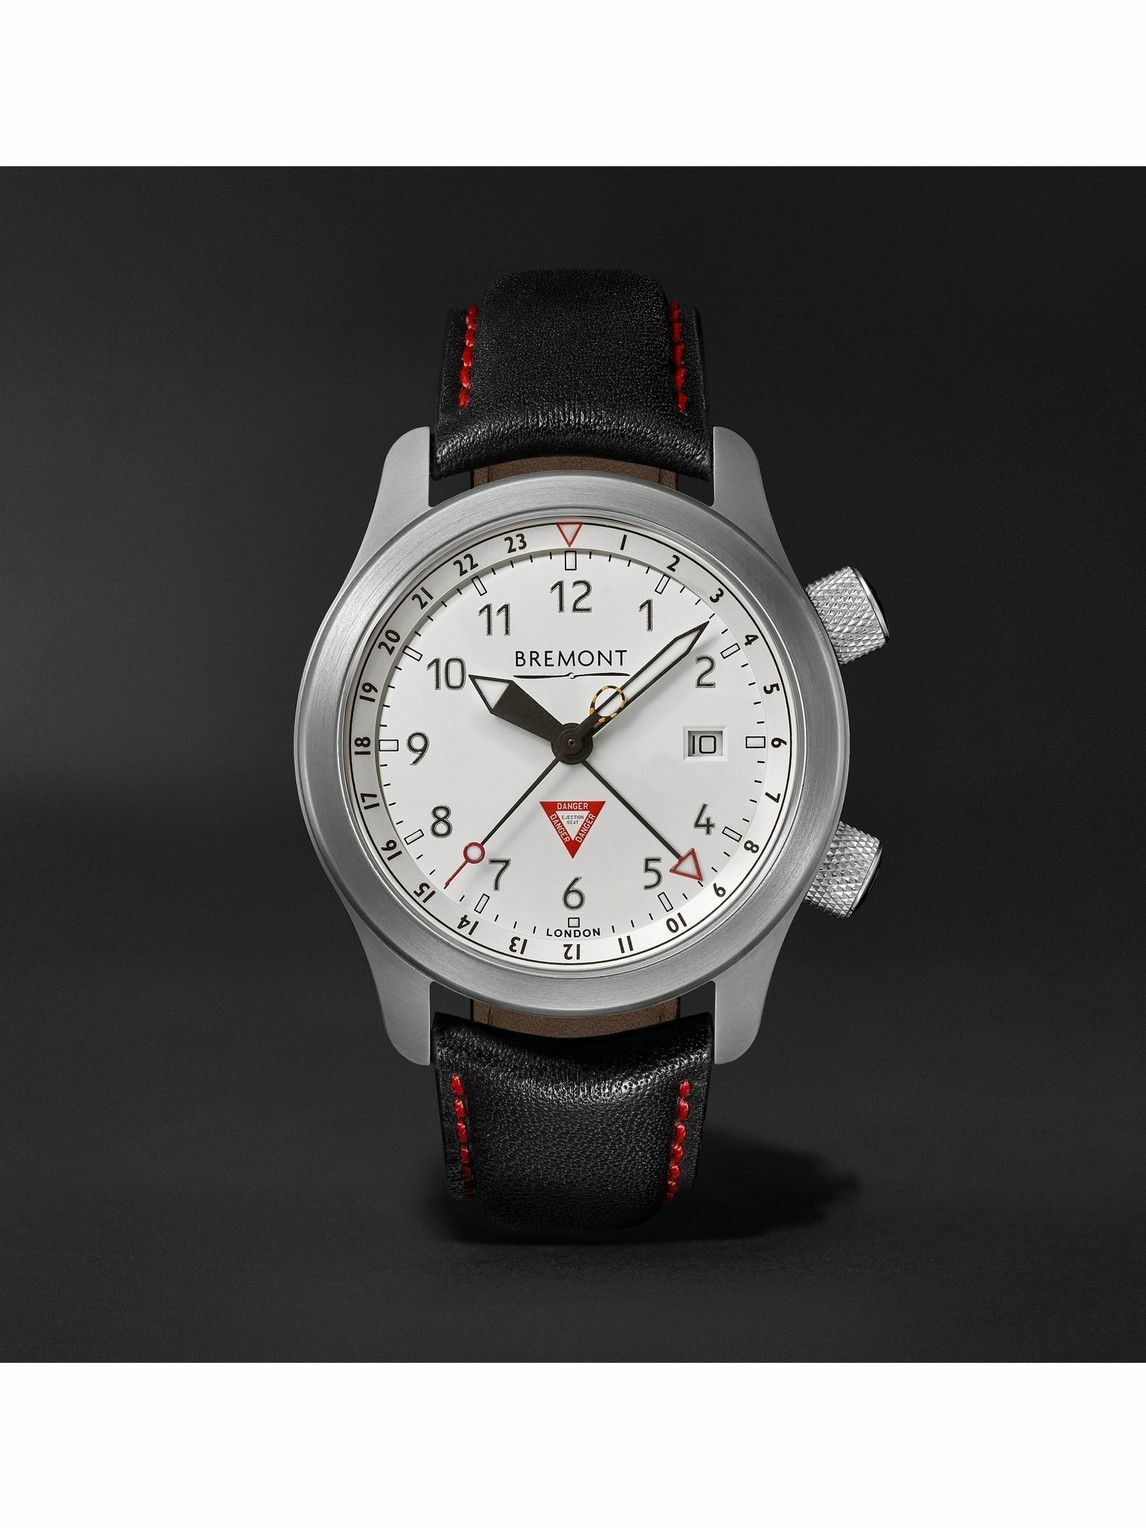 Photo: Bremont - MBIII 10th Anniversary Limited Edition Automatic GMT 43mm Stainless Steel and Leather Watch, Ref. MBIII-WH-LE